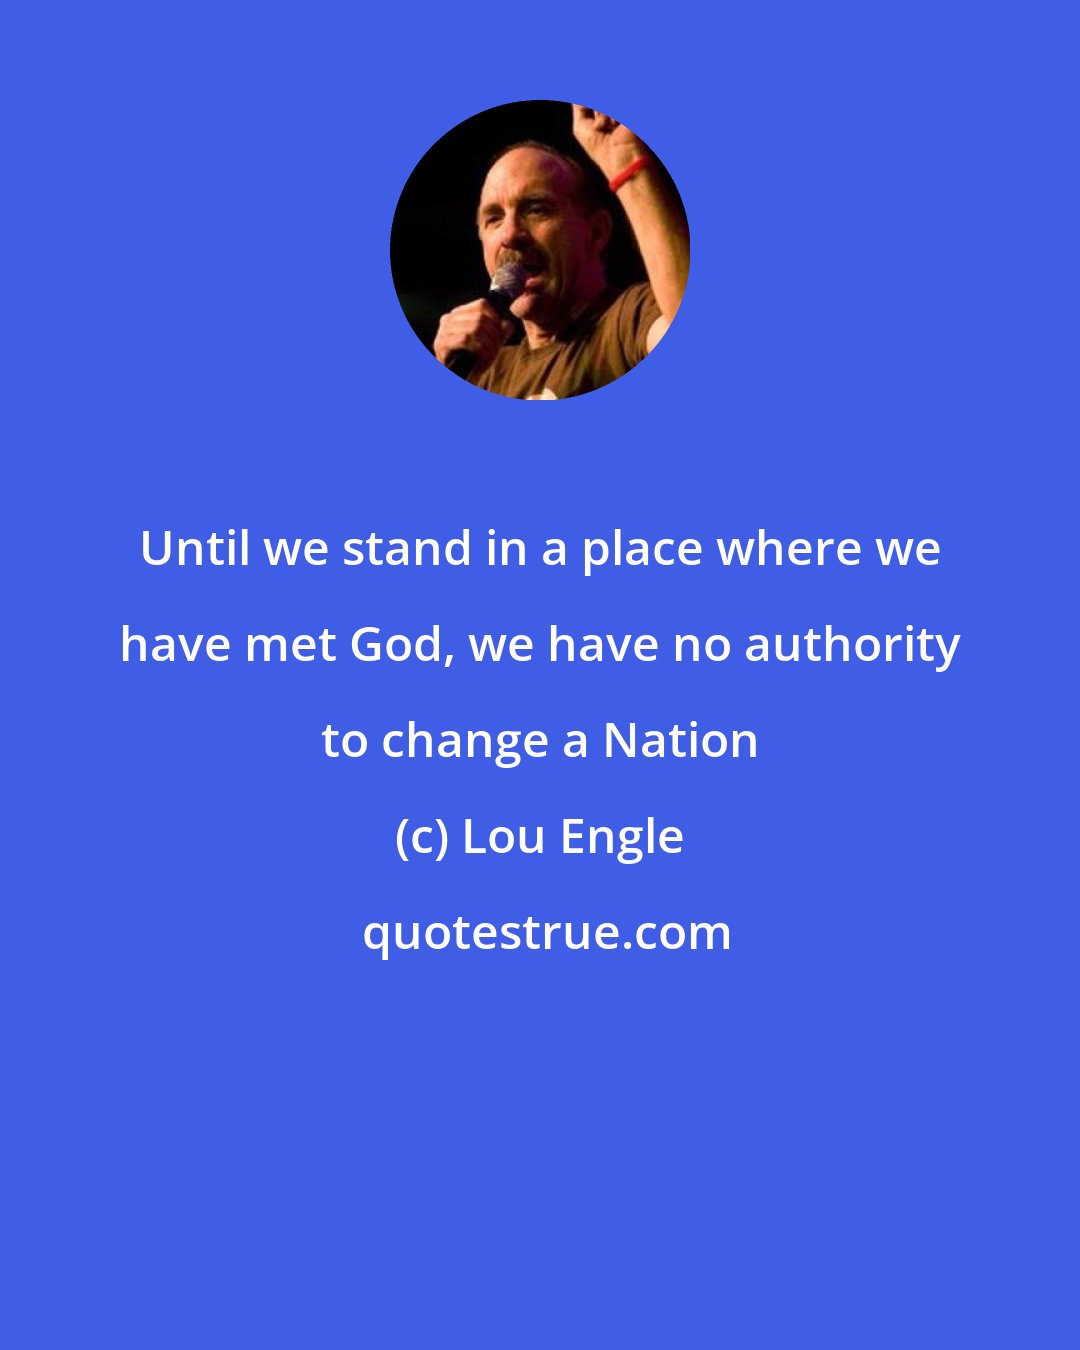 Lou Engle: Until we stand in a place where we have met God, we have no authority to change a Nation